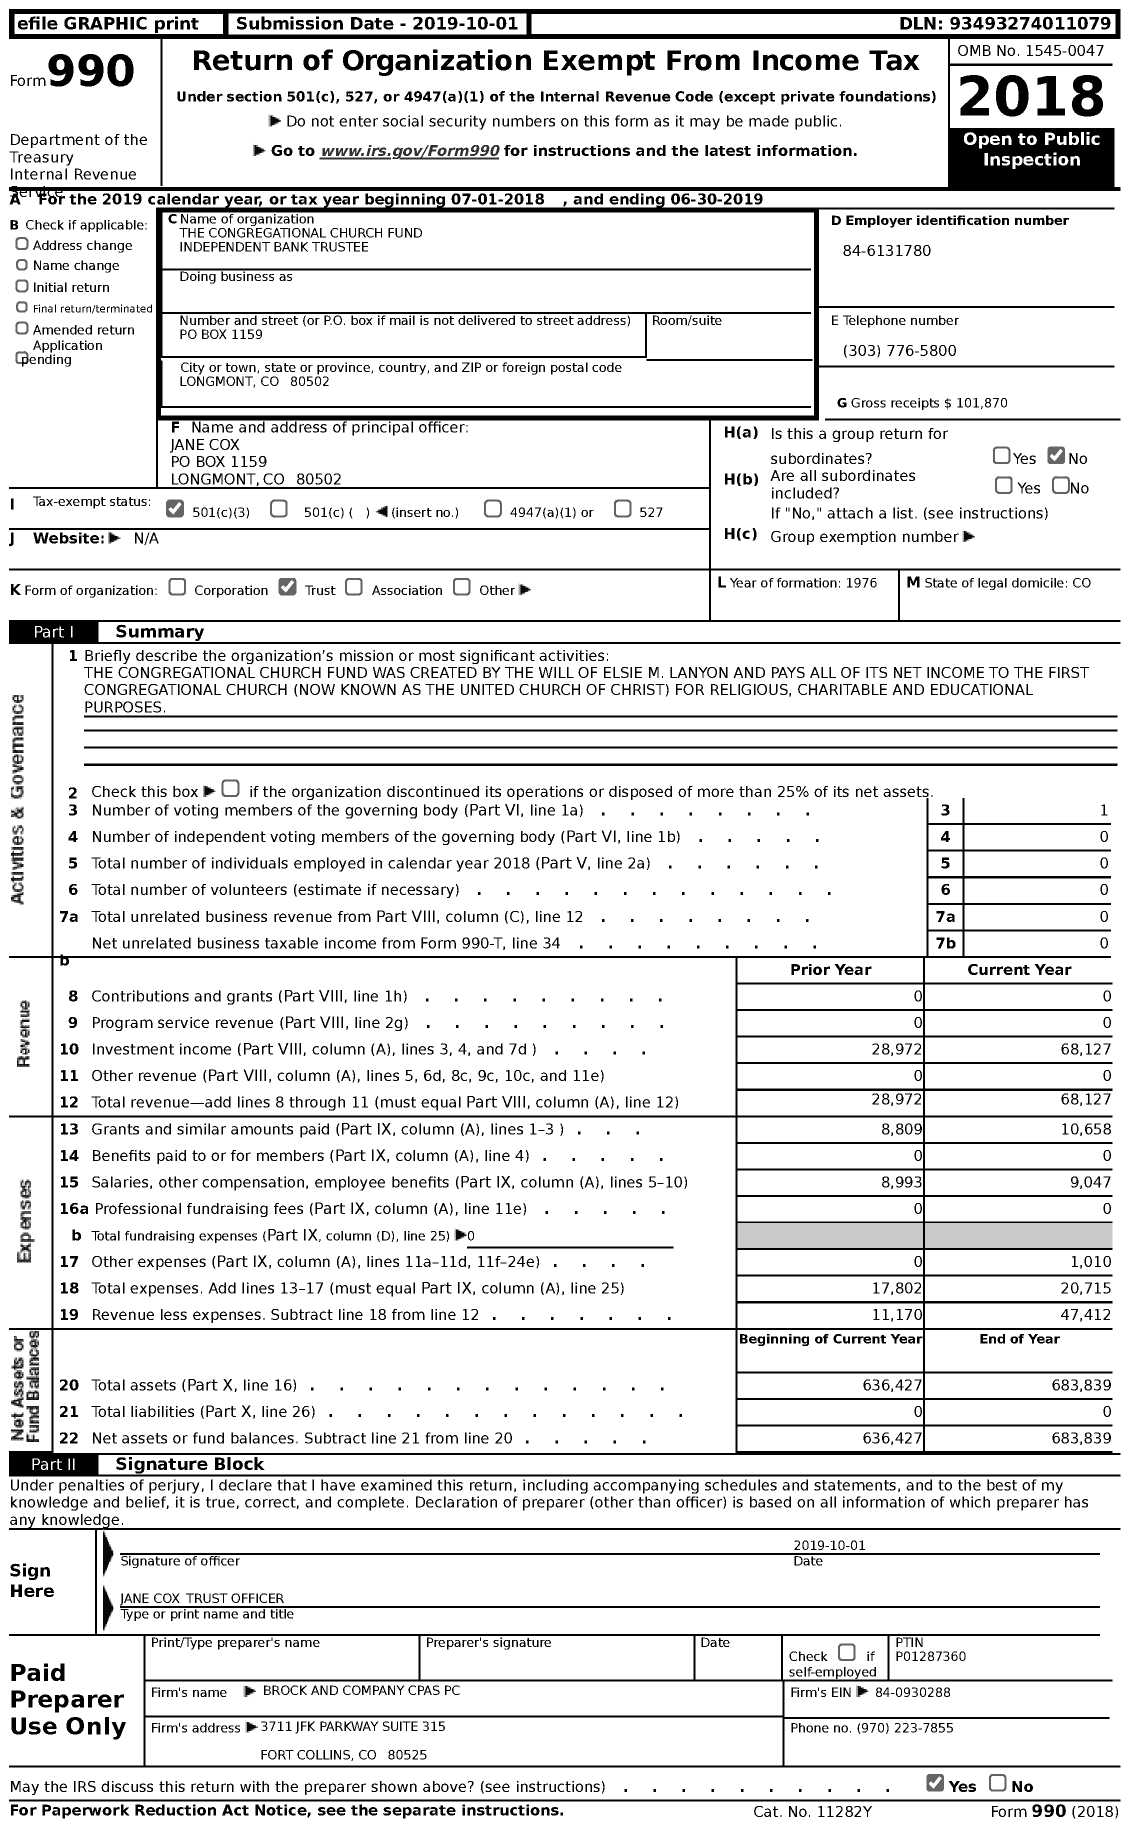 Image of first page of 2018 Form 990 for The Congregational Church Fund First Interstate Bank Trustee